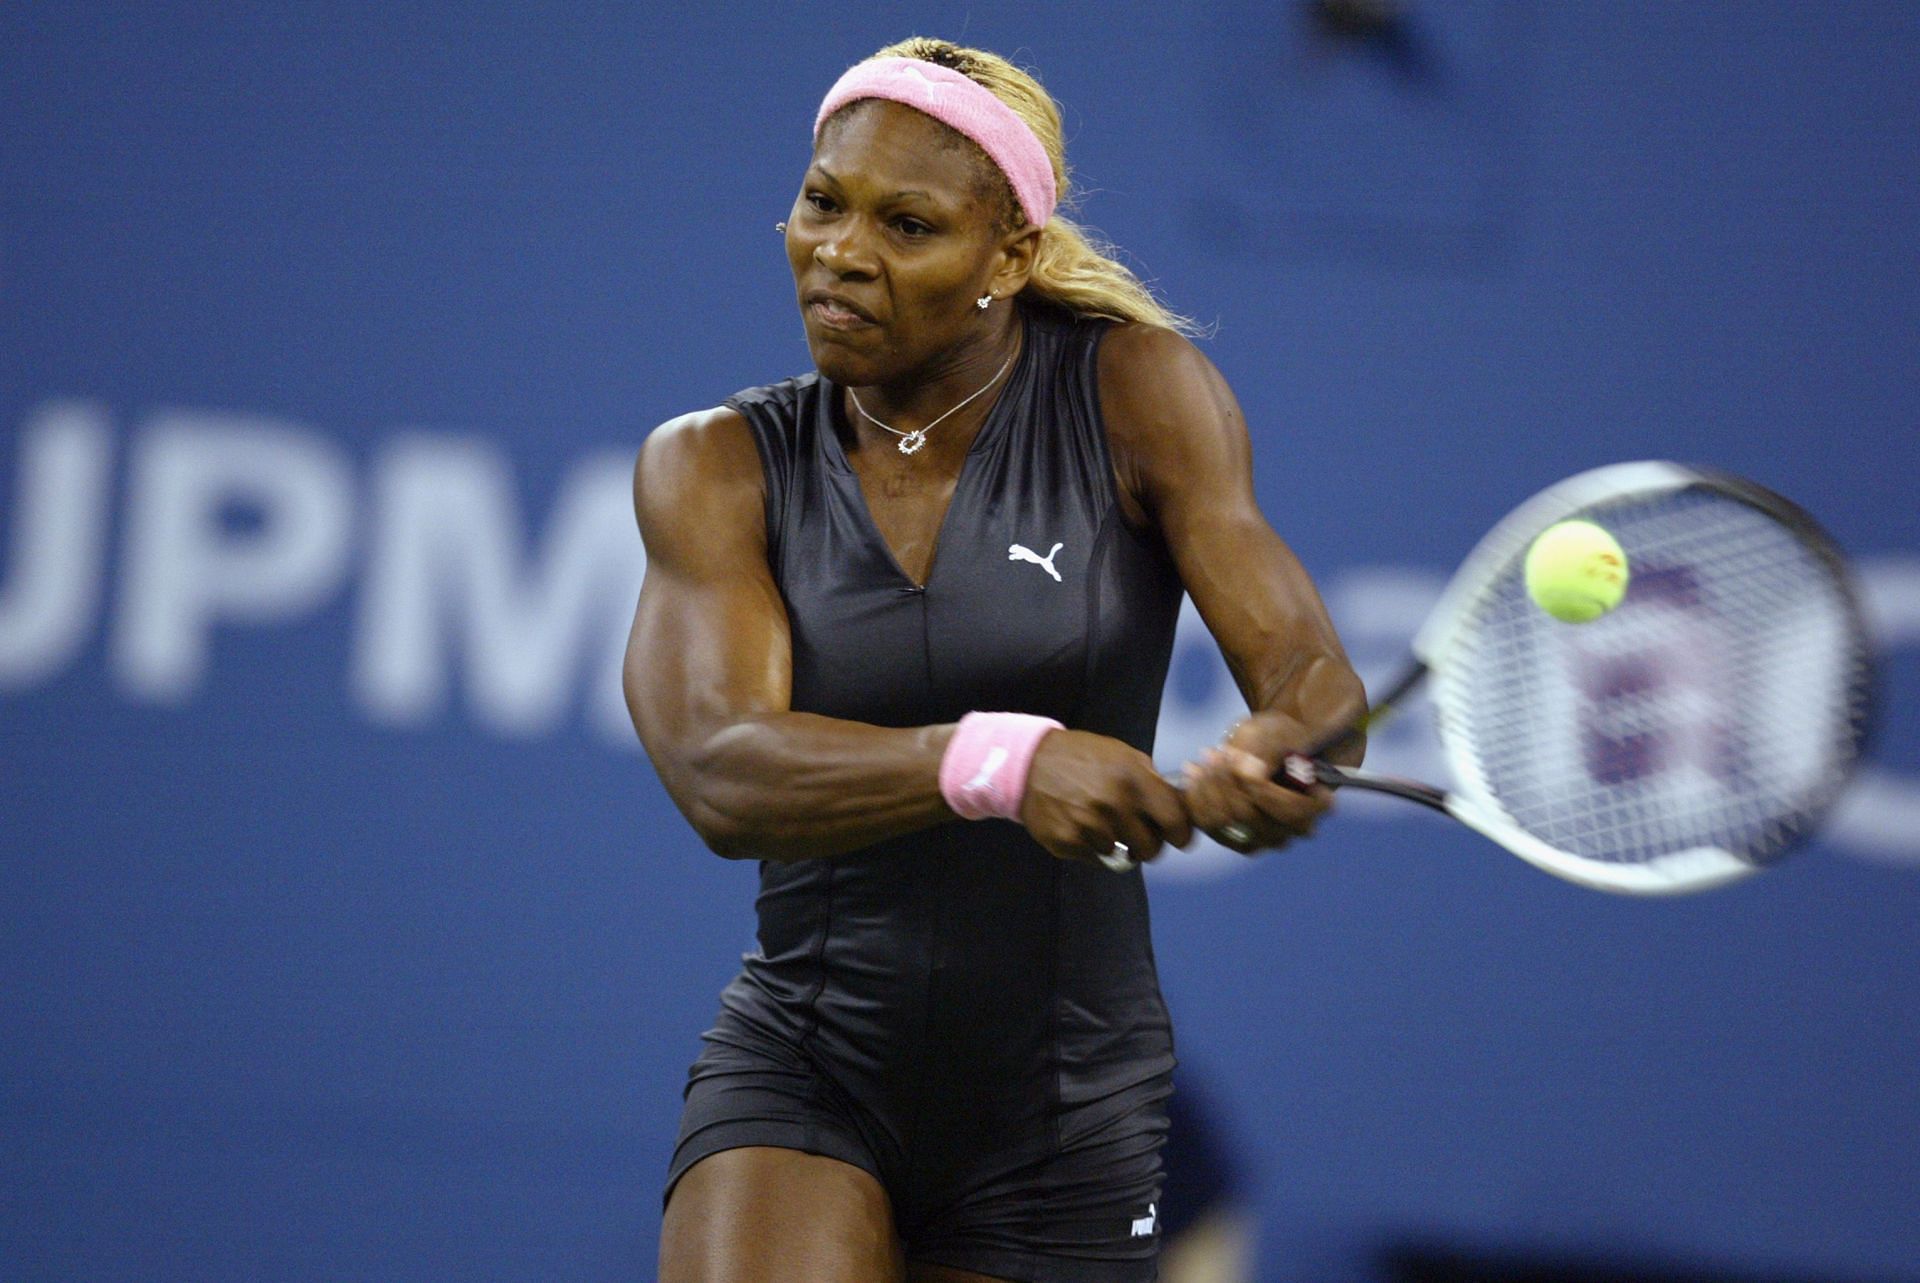 Serena Williams played a backhand